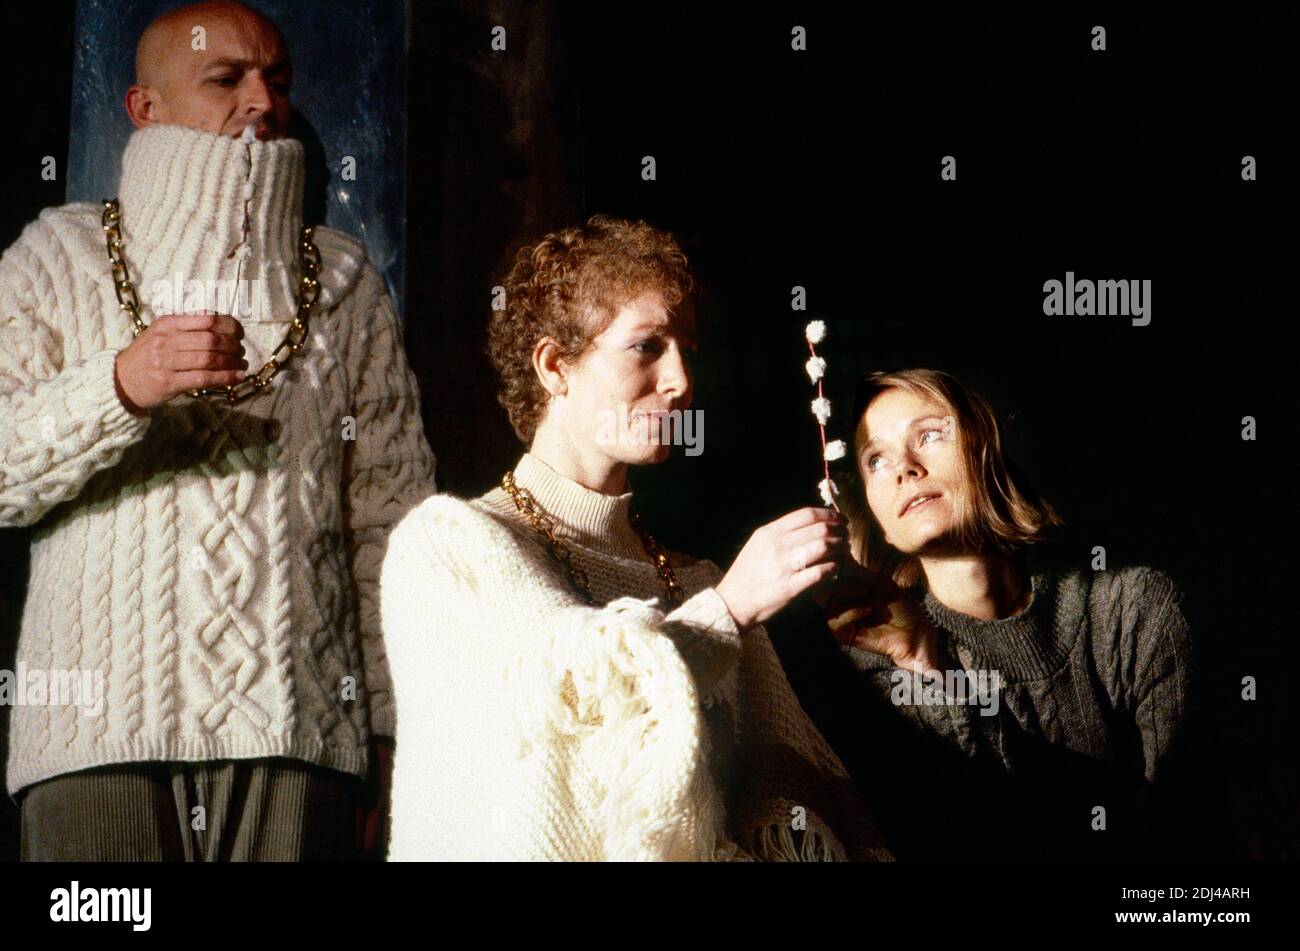 l-r: Andrew Jarvis (Claudius), Anne White (Gertrude), Veronica Smart (Ophelia) in HAMLET by Shakespeare at the Haymarket Theatre Leicester, England  19/09/1989 international touring production  design: David Borowsky  lighting: Krystof Kozlowski  choreography: Chiang Ching  director: Yuri Lyubimov Stock Photo